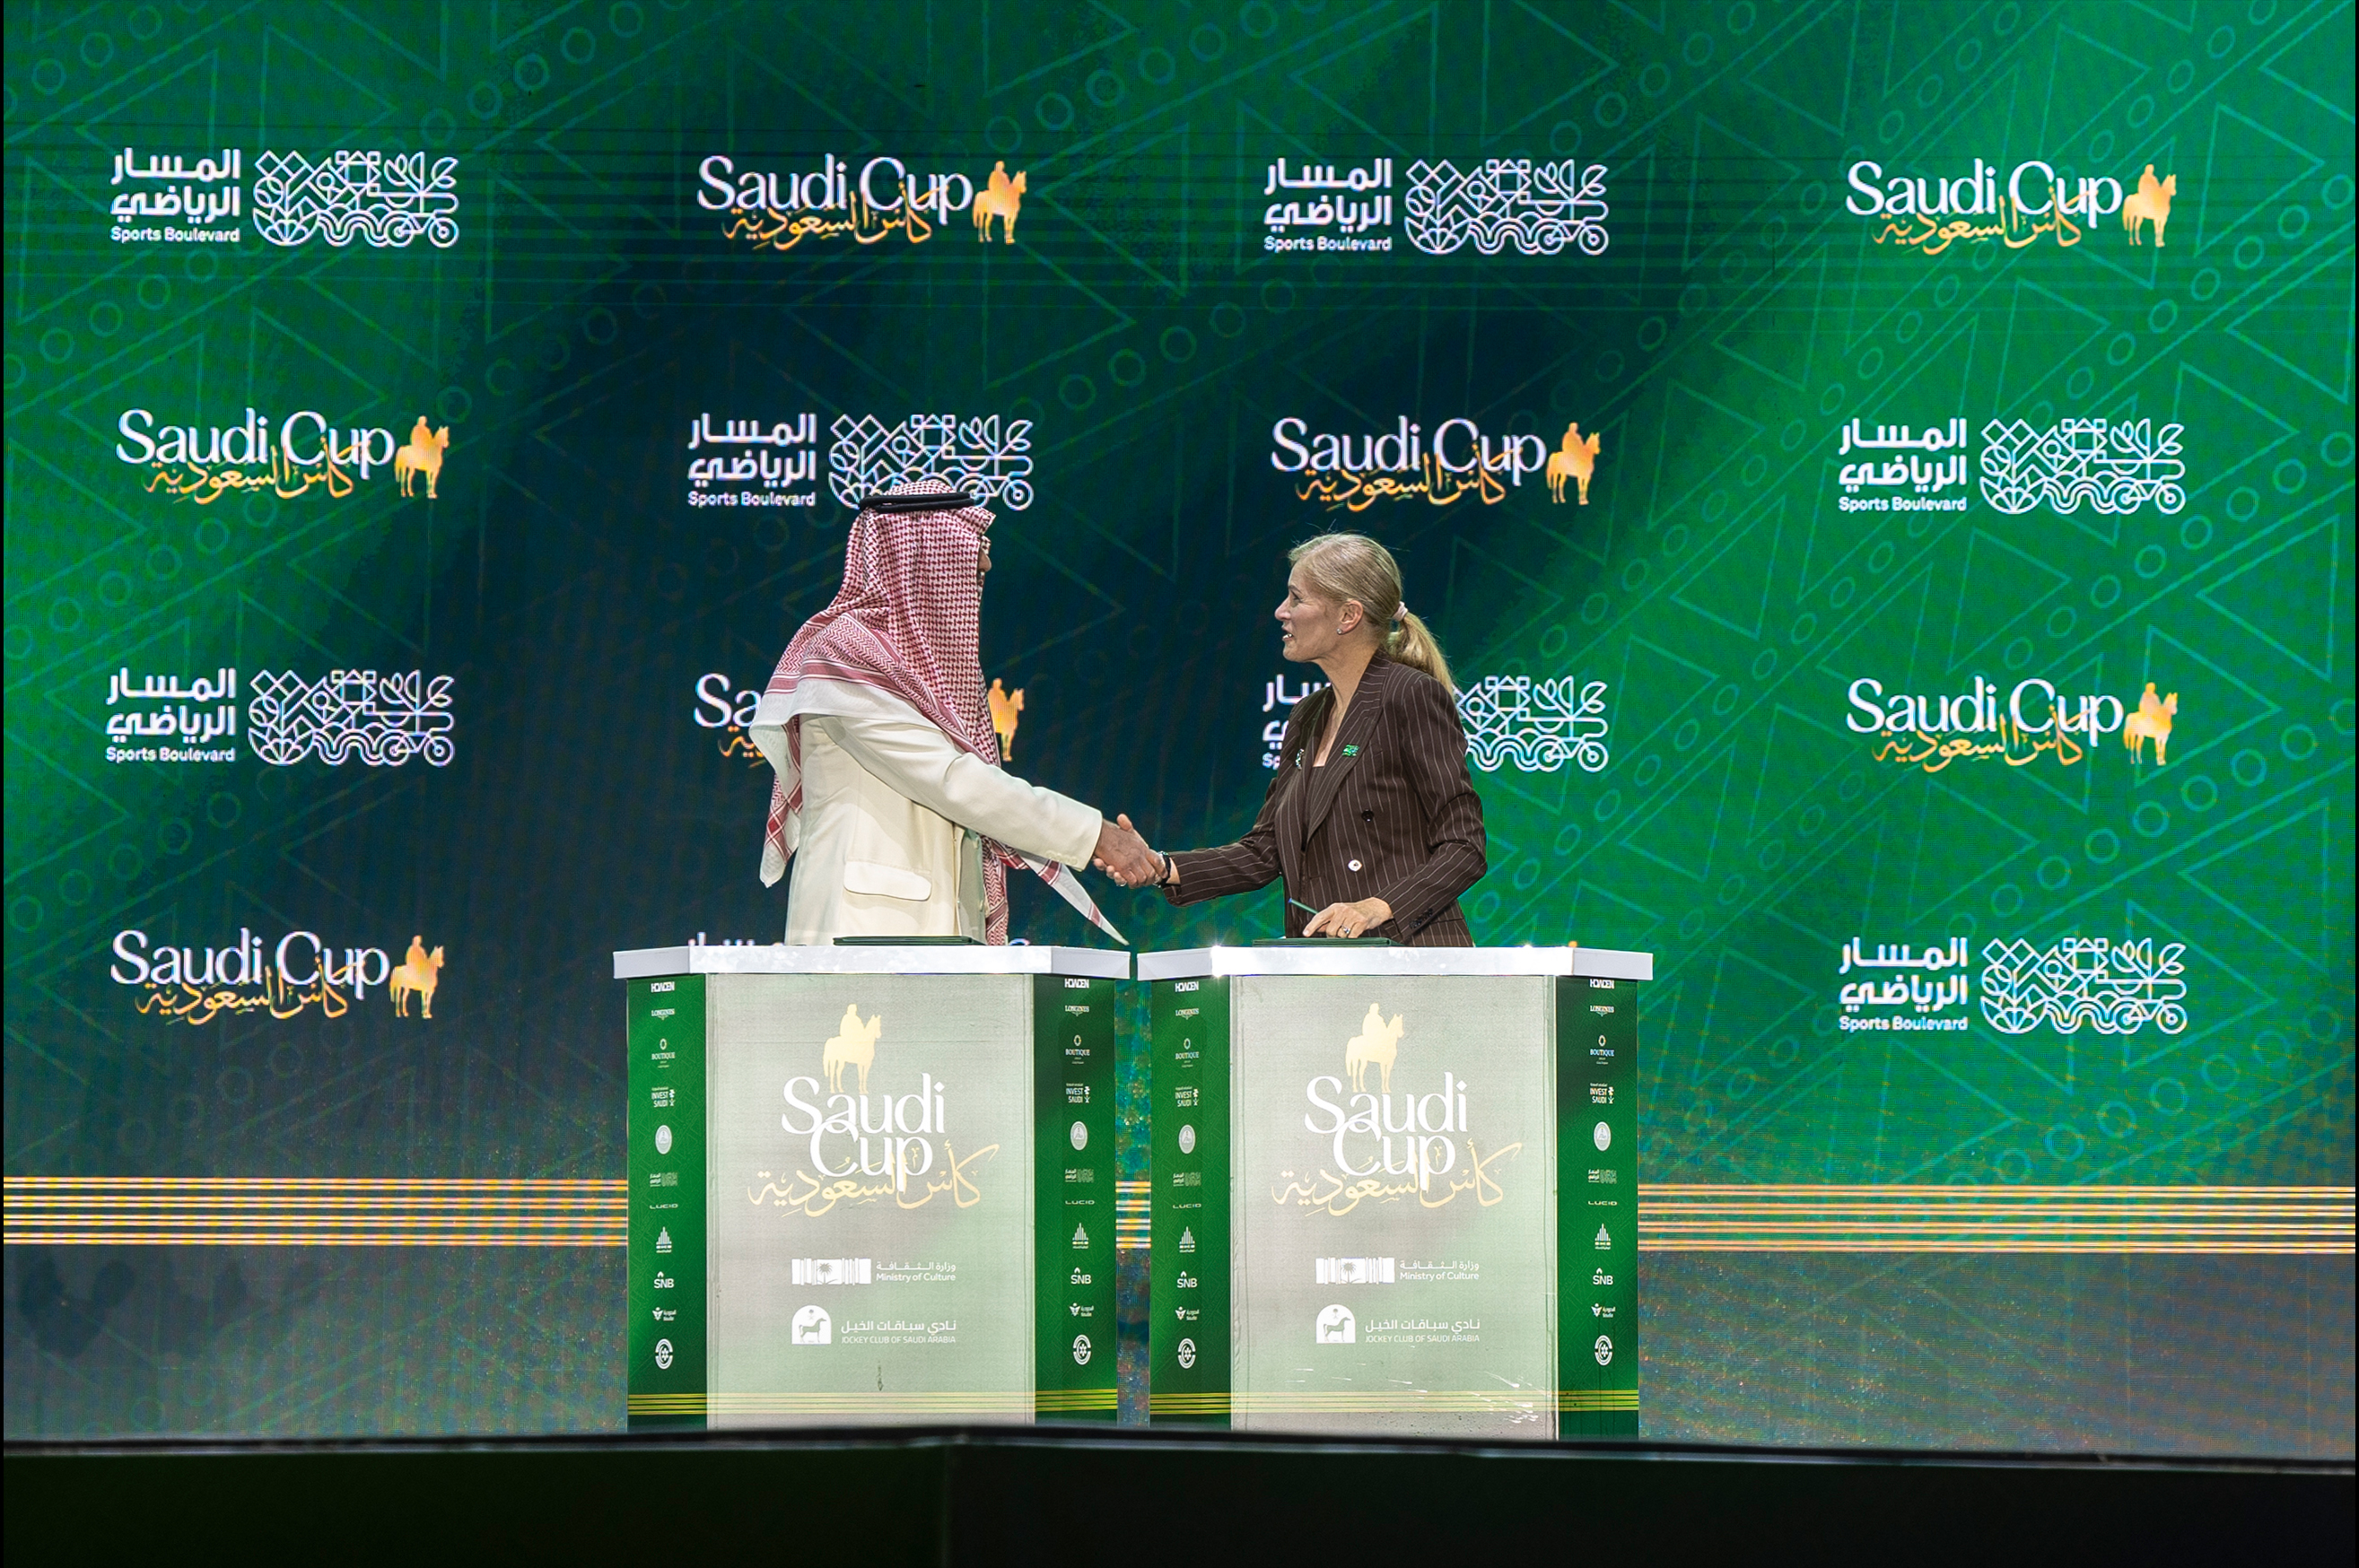 The Sports Boulevard Foundation (SBF) has signed a partnership with the Jockey Club of Saudi Arabia (JCSA), making Sports Boulevard an official 